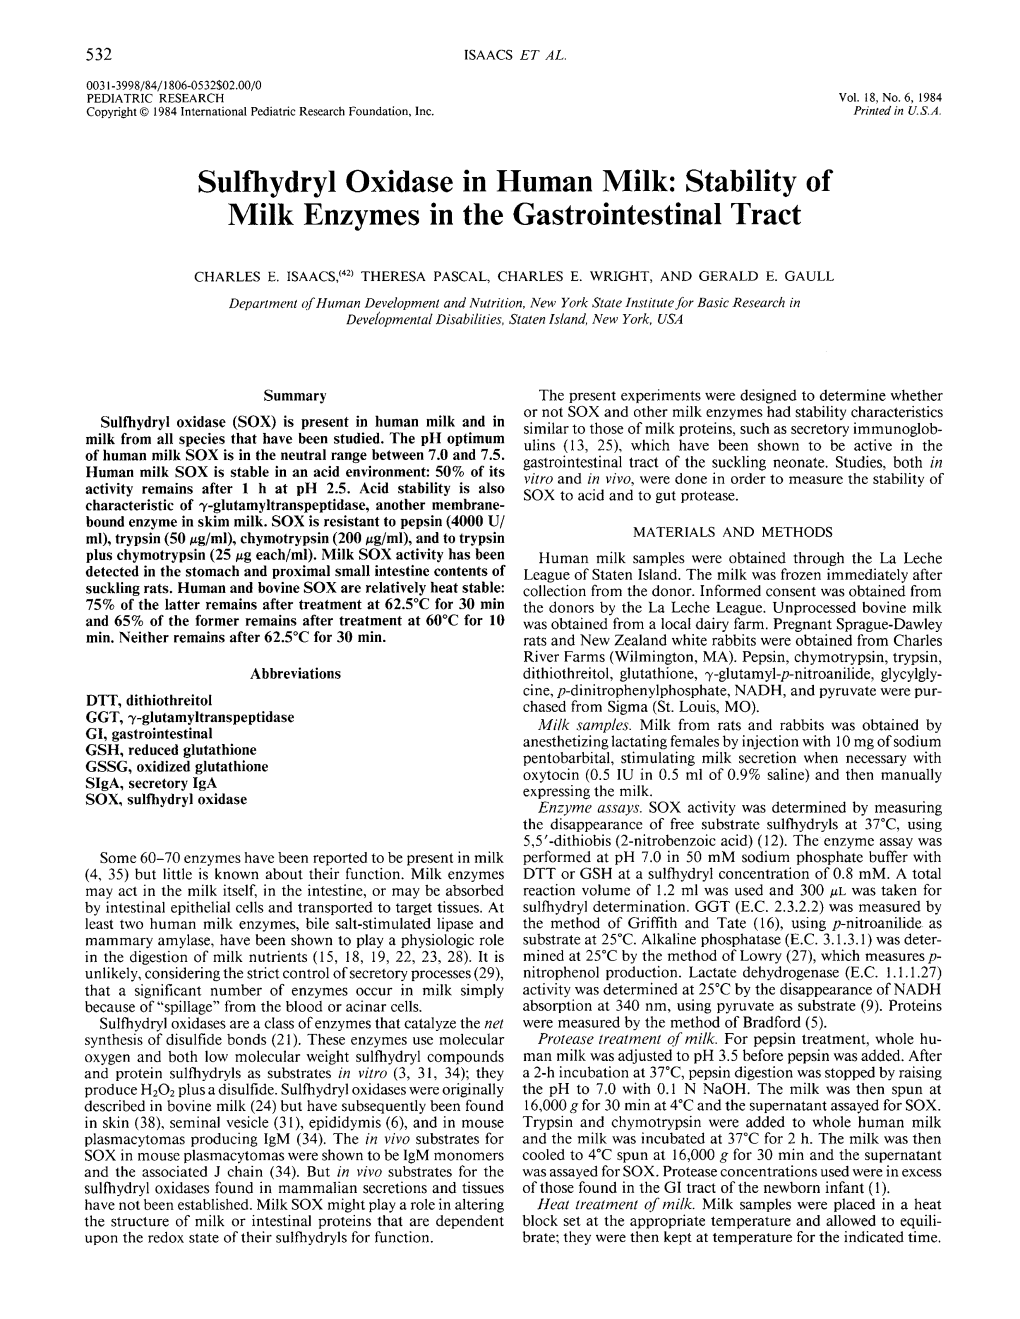 Sulfhydryl Oxidase in Human Milk: Stability of Milk Enzymes in the Gastrointestinal Tract